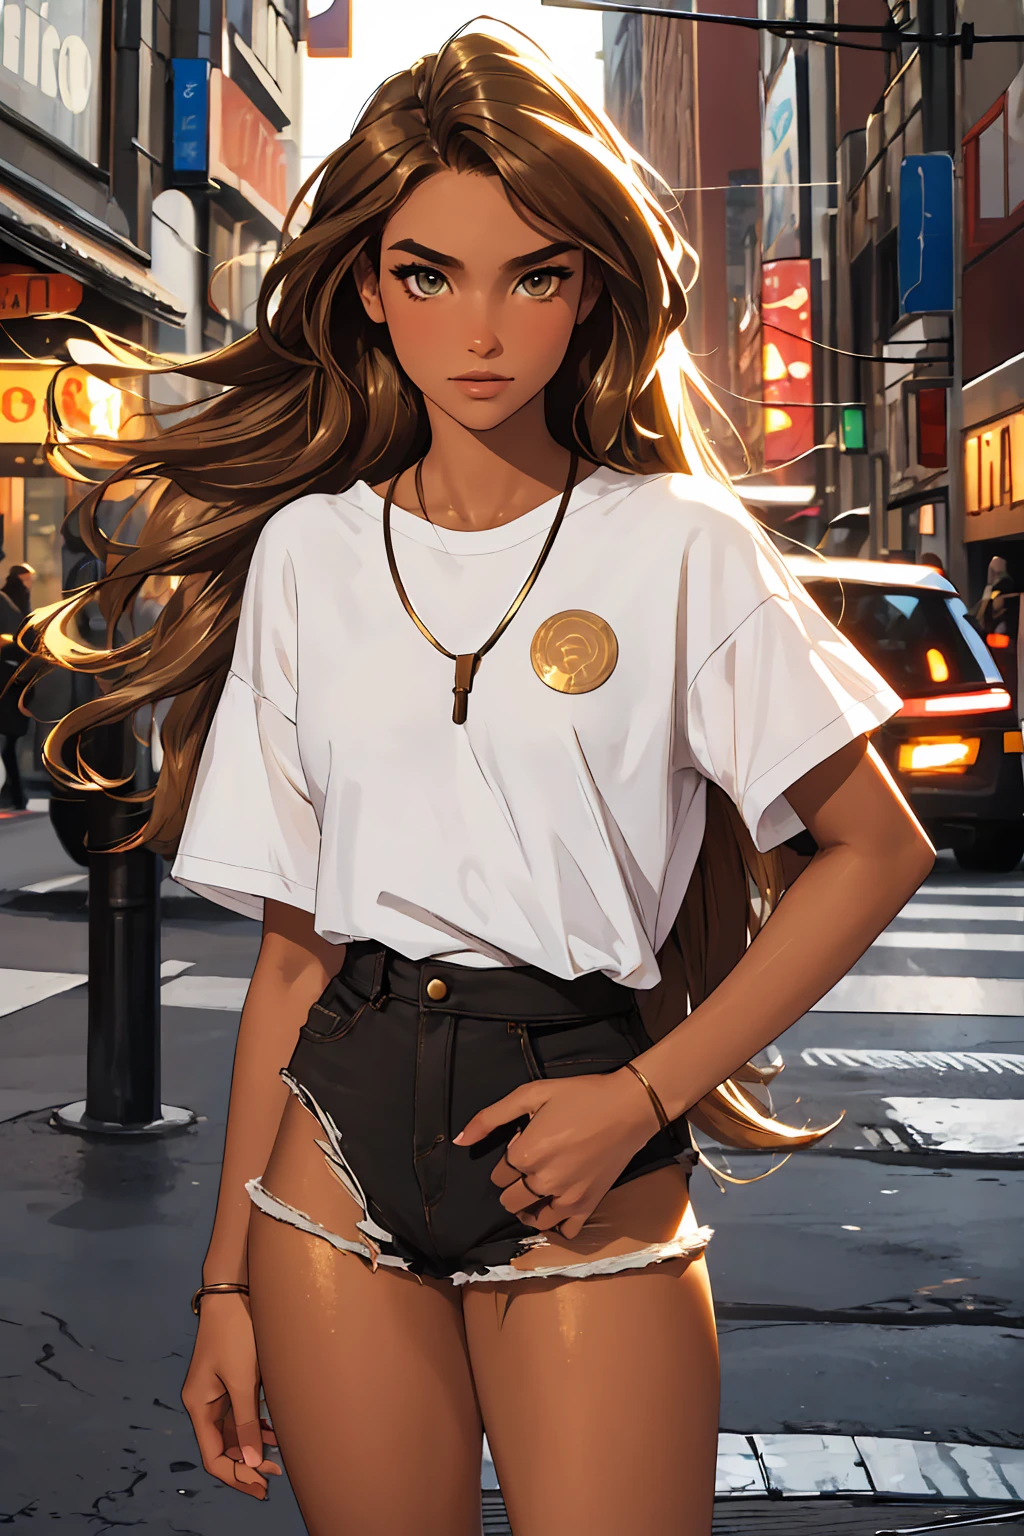 (best quality: 1.2), clean face, (masterpiece: 1.2, 8k)(PureErosFace_V1: 0.7), perfect anatomy, 1girl,a beautiful fashion model ,(masterpiece, official art, best quality) (hazel eyes) ,long and shiny hair, brown hair with blonde streaks in hair, long hair, full lips, upturned nose ((((tan skin, bronze skin, 1.3)))), big , lifstrangerachel looking at viewer, revealing outfit, absurdity, intricate details, city, dimanic pose, night, neon signs, cinematic lighting, (highly detailed skin: 1.2), wearing
 short shorts and a loose white shirt